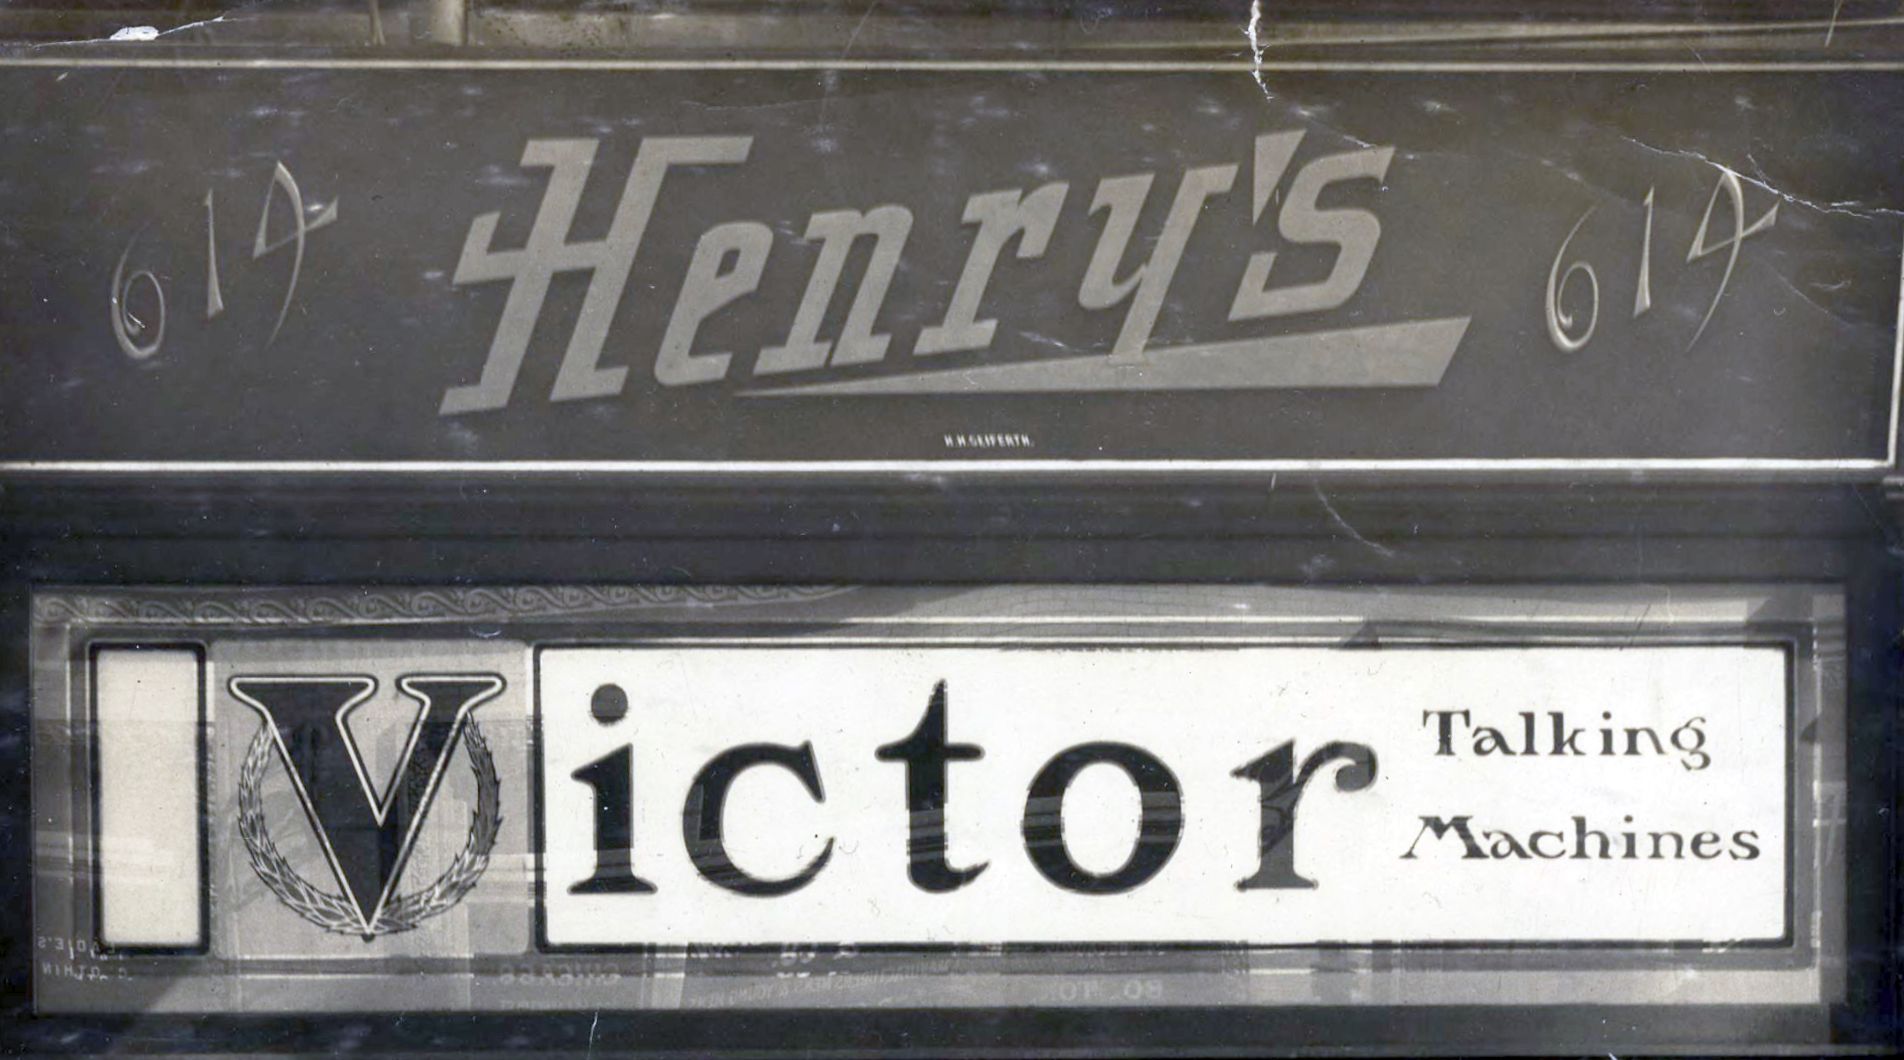 Shop front reading "Henry's" above a gilded and hand-painted glass panel for "Victor Talking Machines".